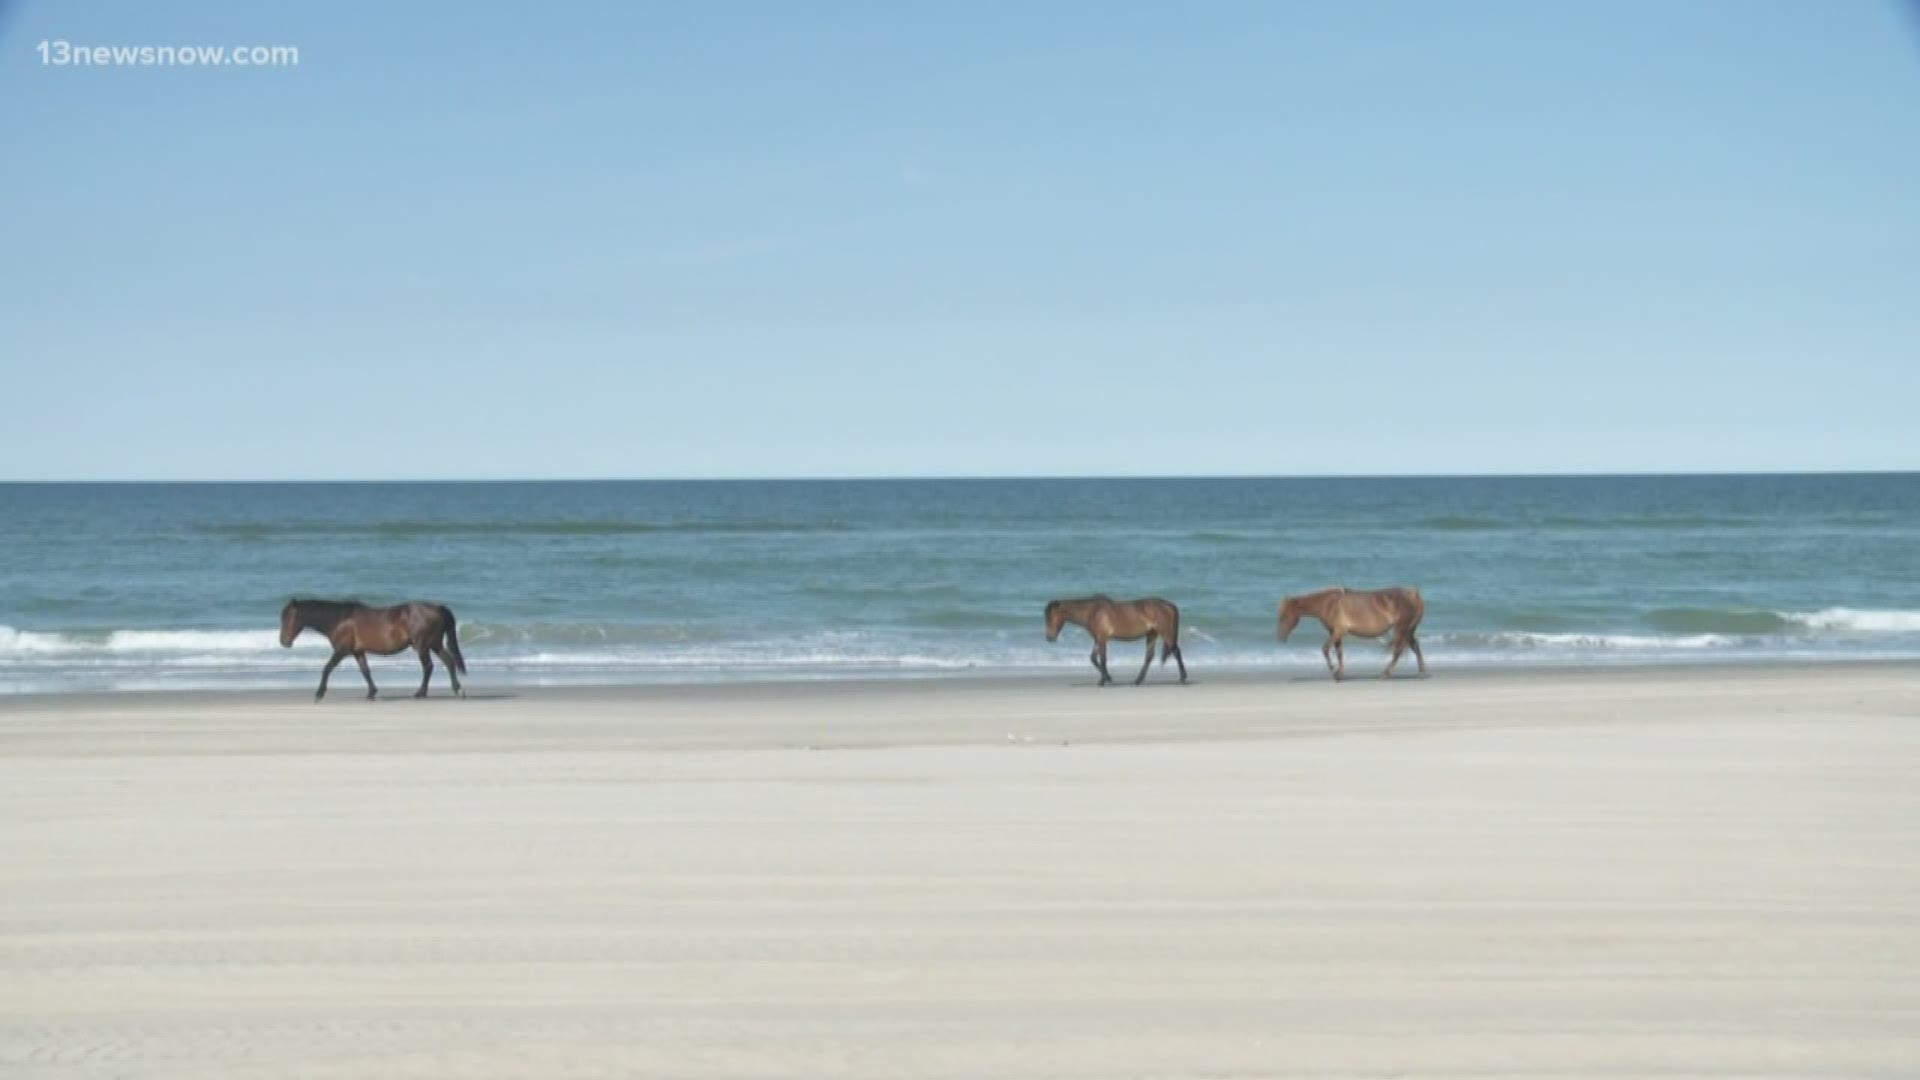 Currituck County Sheriff's Deputies are no longer going to warn people for approaching the Corolla wild horses. Deputies will go straight to issuing citations to those that break the law.